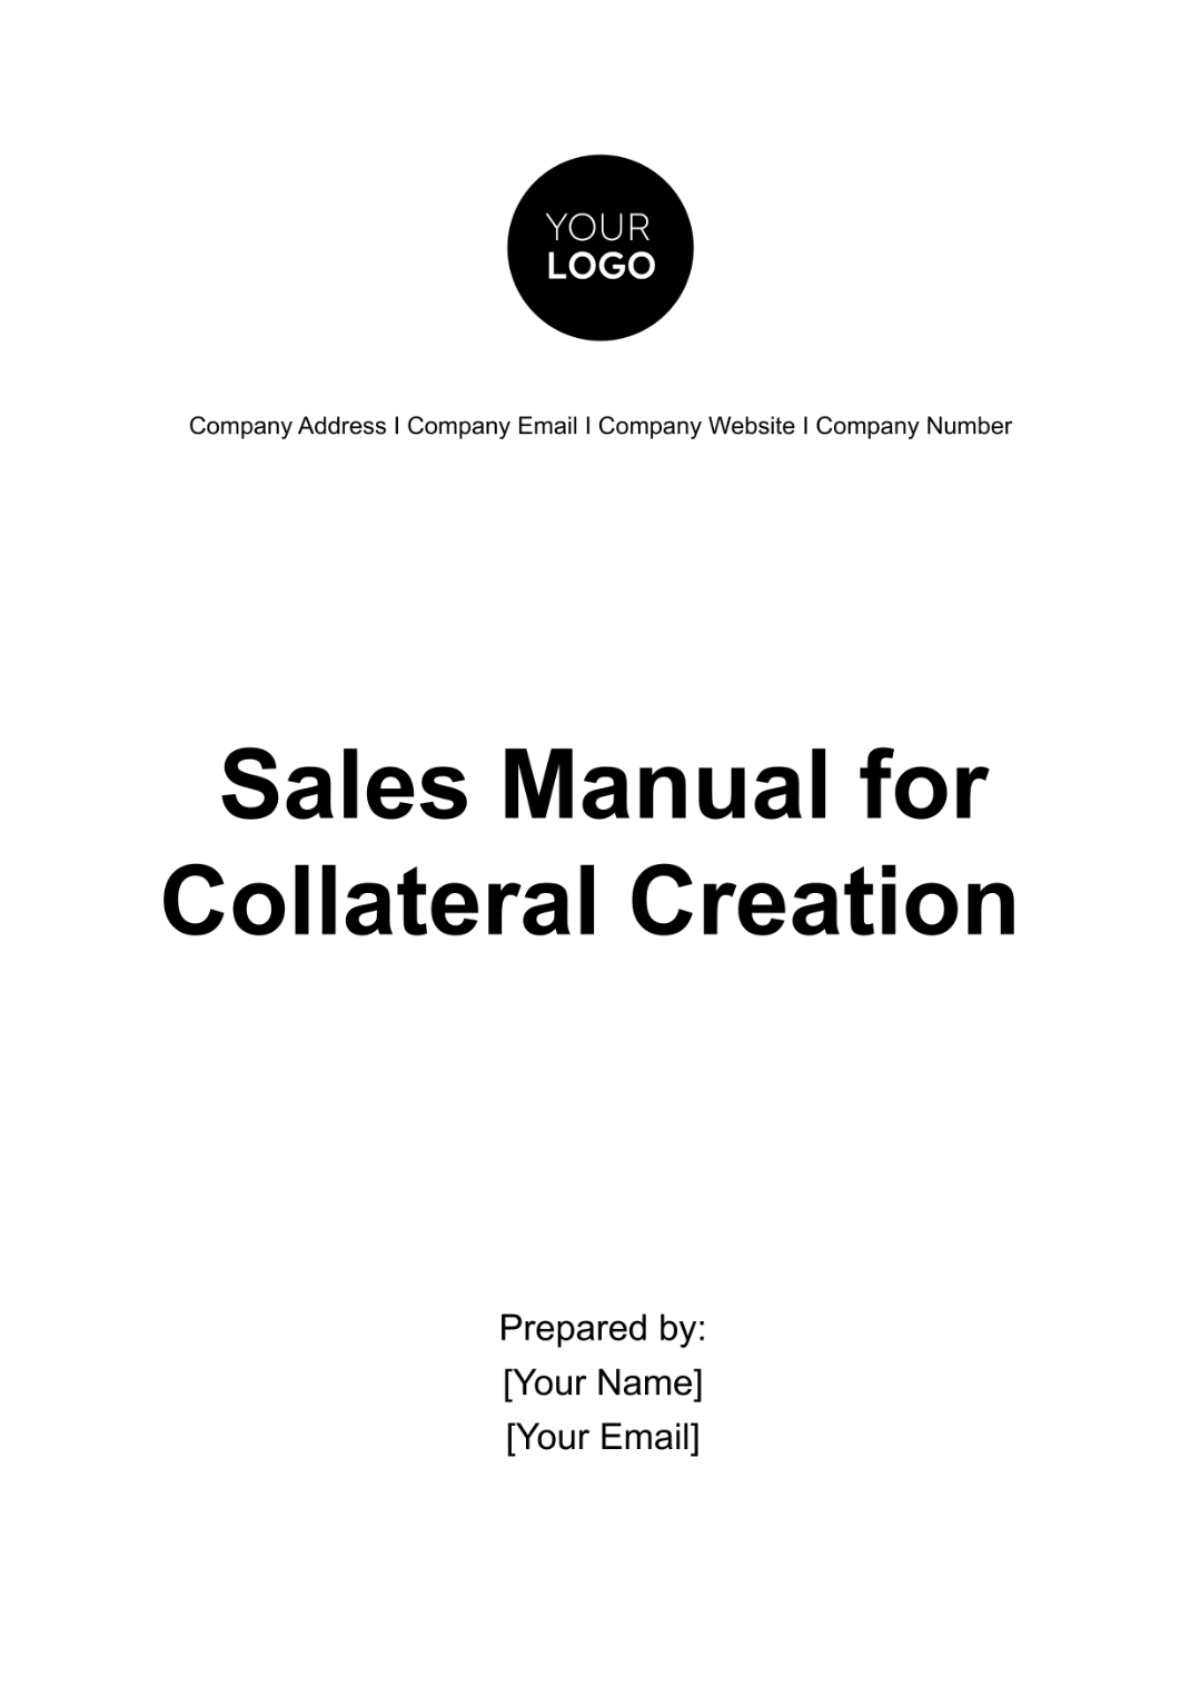 Sales Manual for Collateral Creation Template